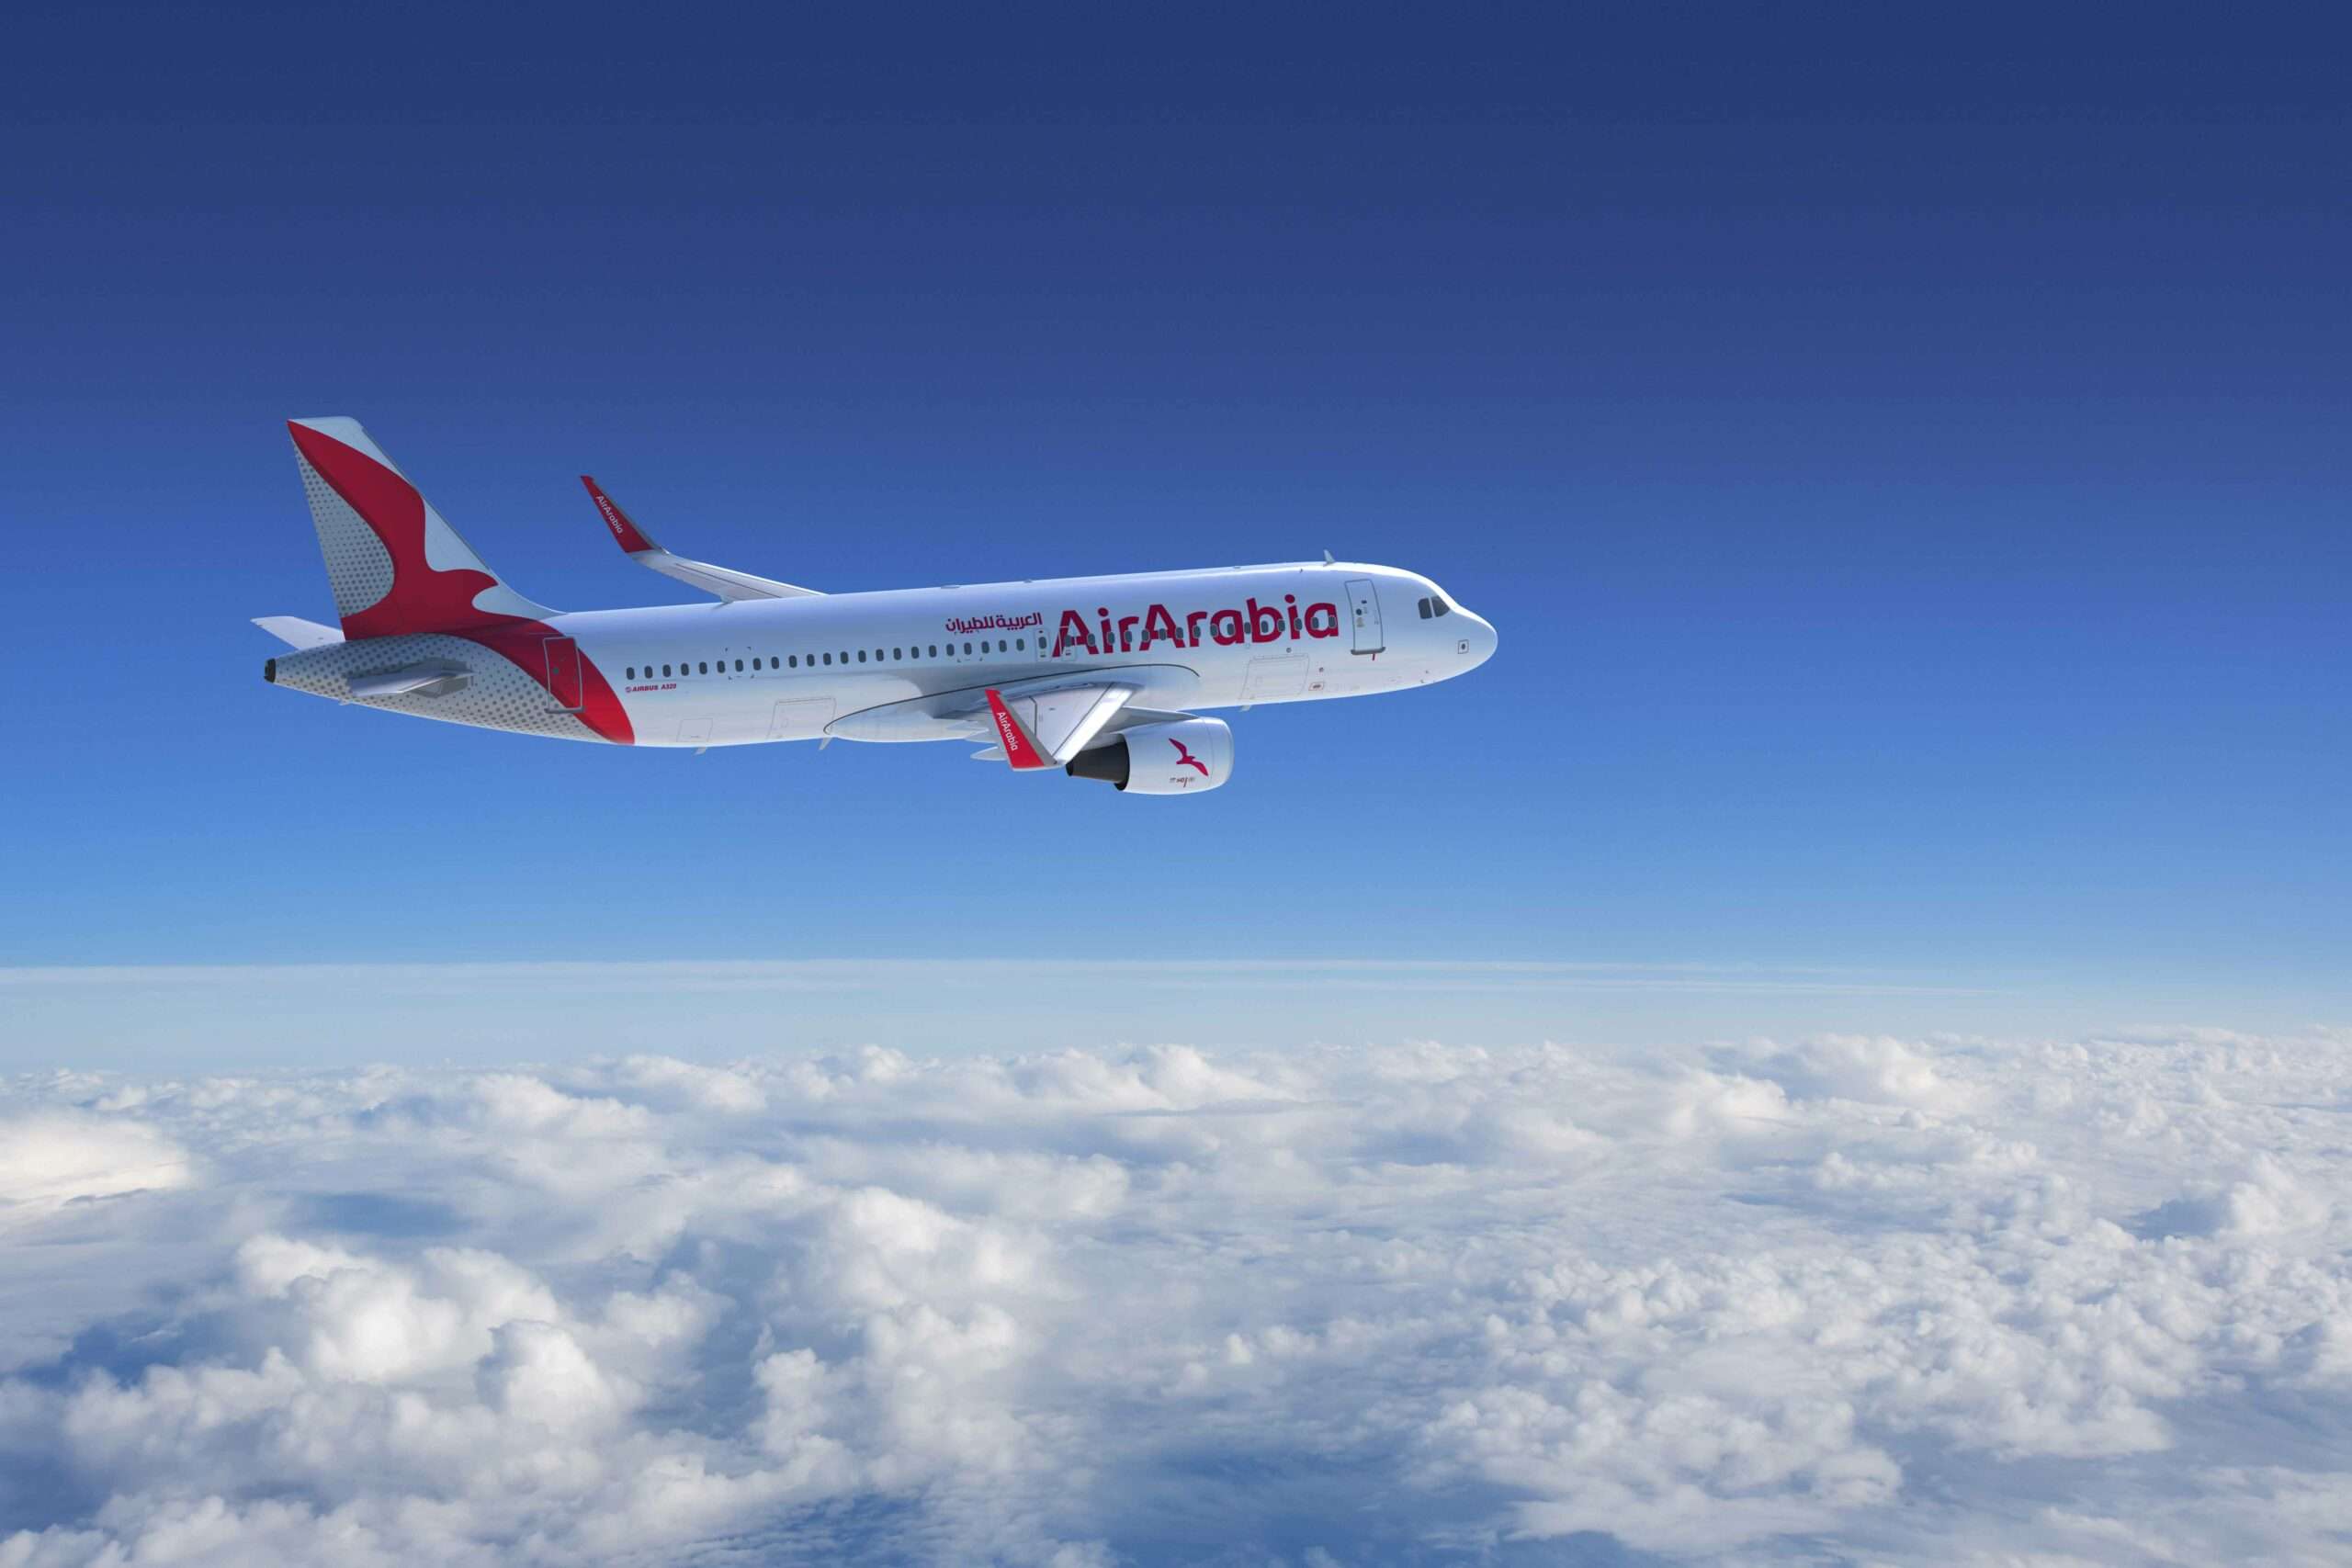 To Colombo They Go: Air Arabia Abu Dhabi's New Route